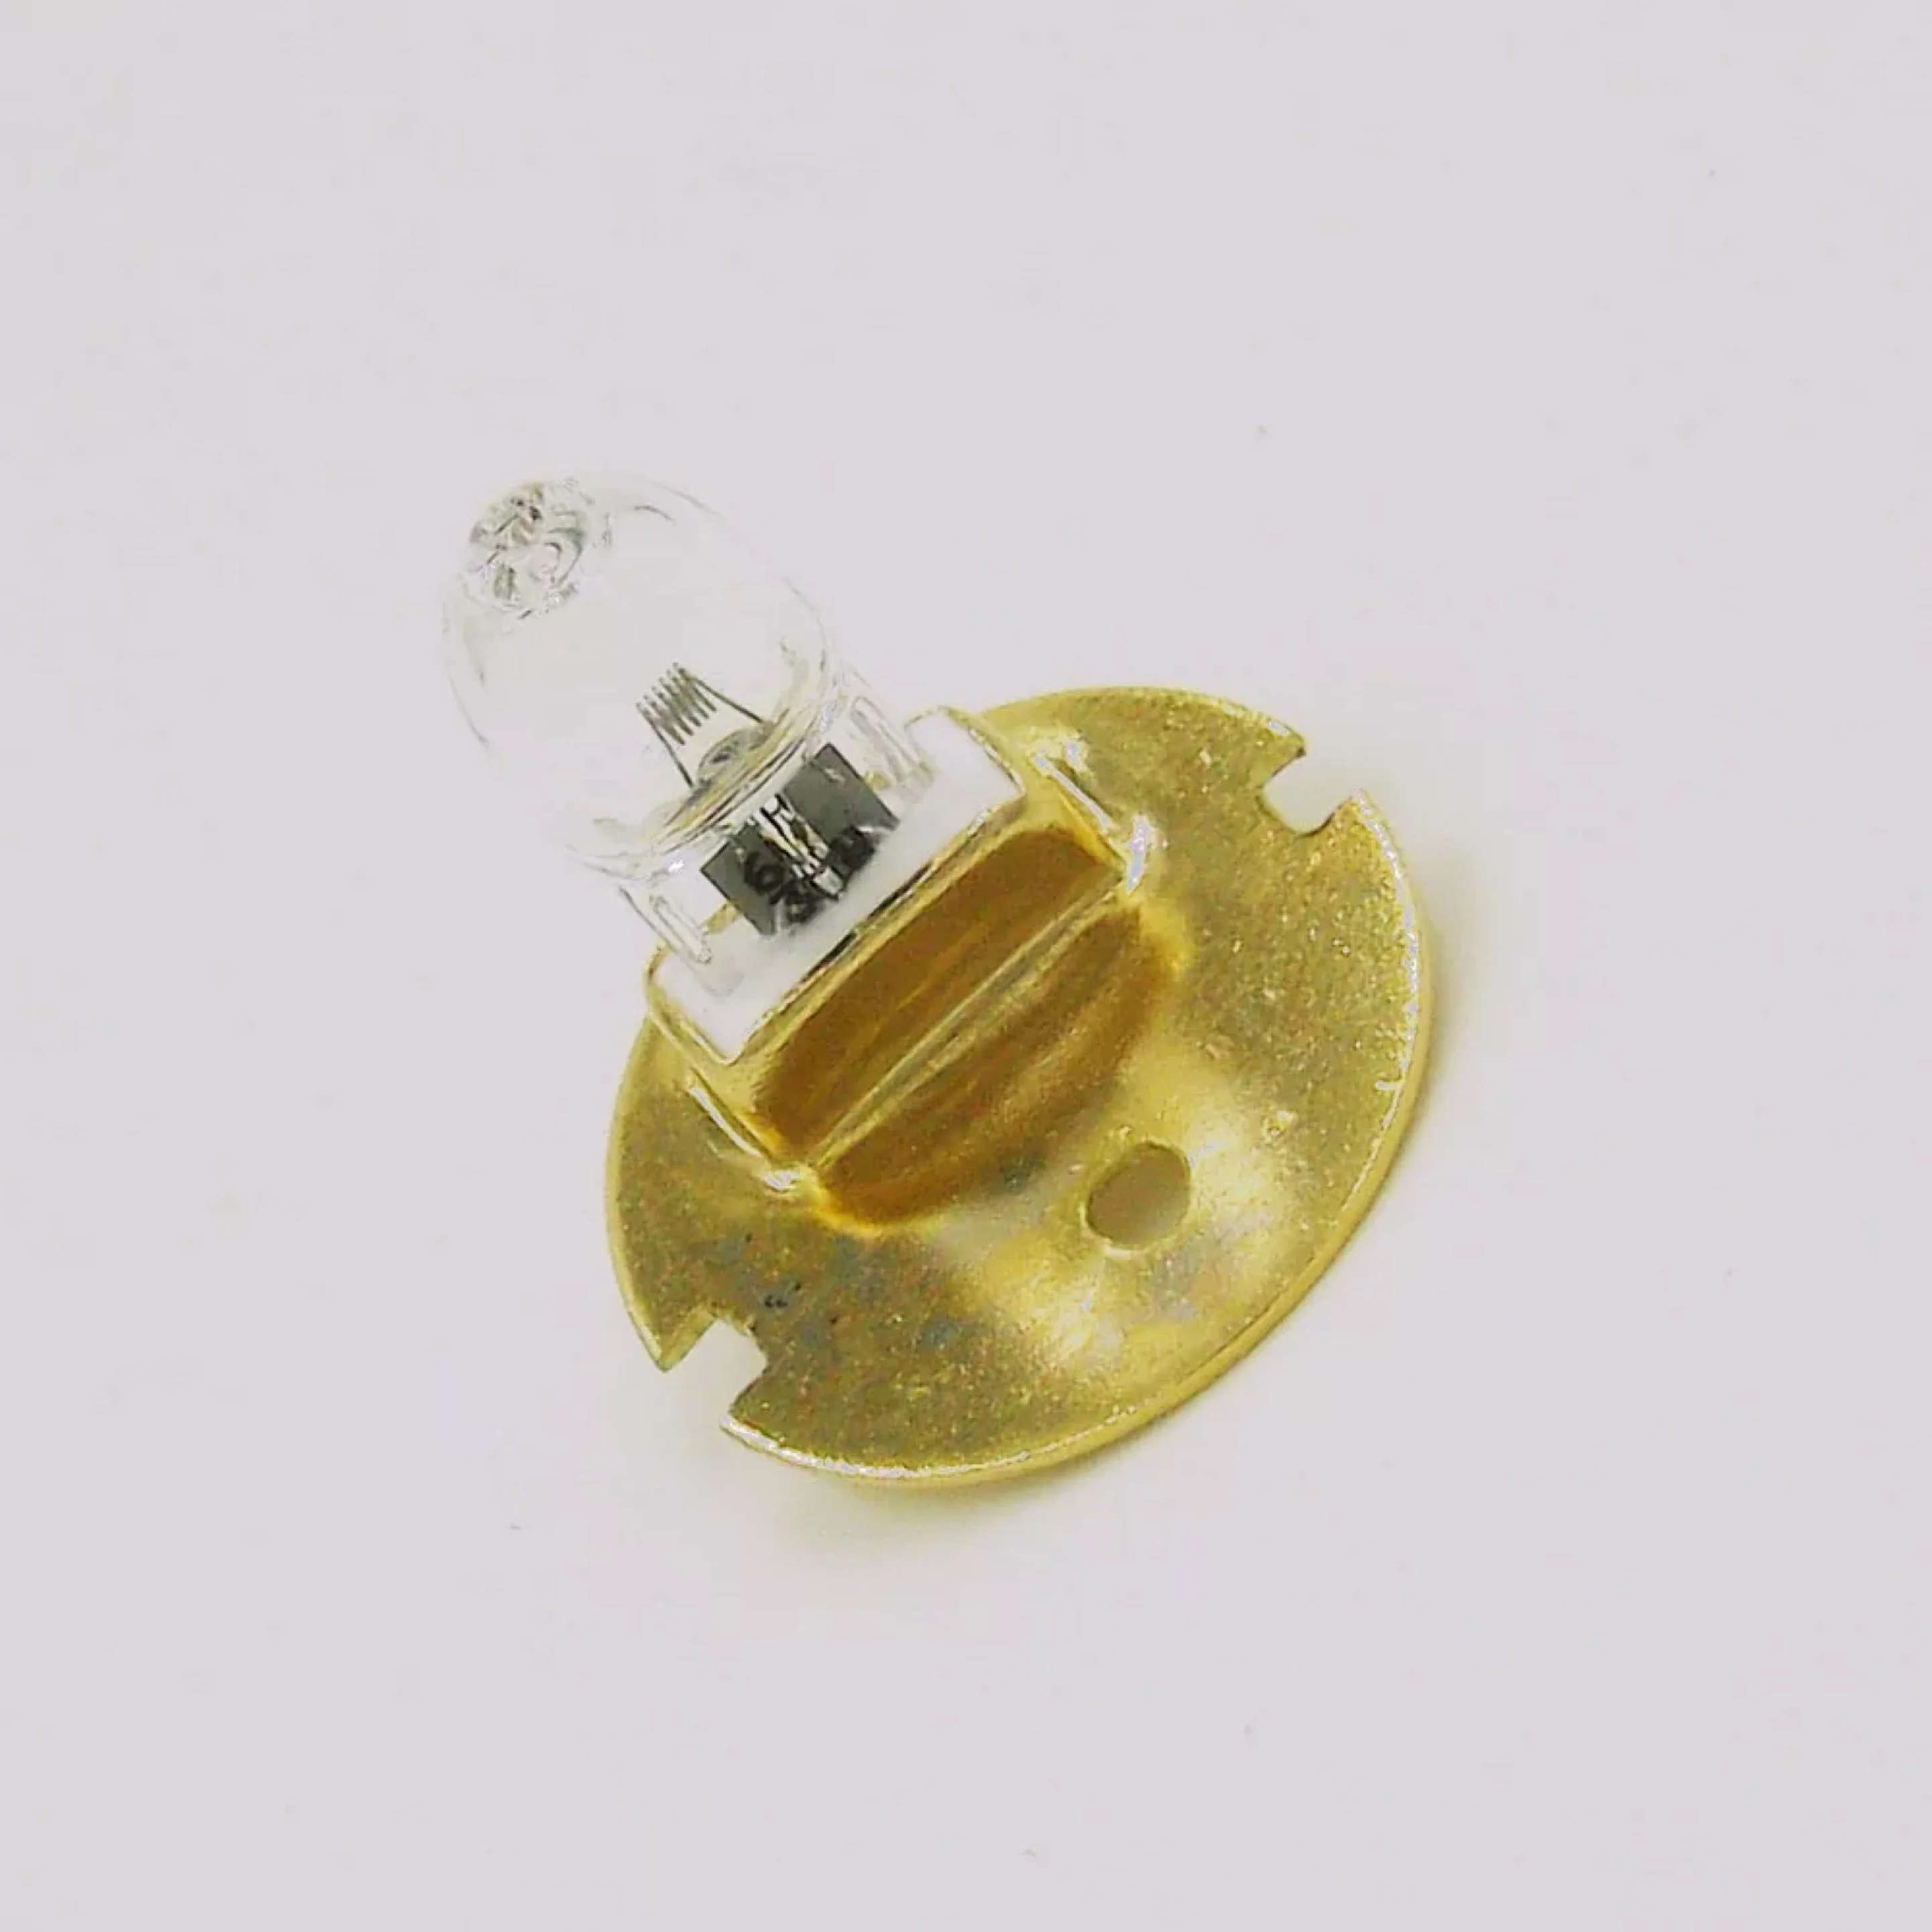 

6V 20W 6V 30W G4 halogen lamp used for HUVITZ CCP-3000 CCP-3100 visional chart projector bulb